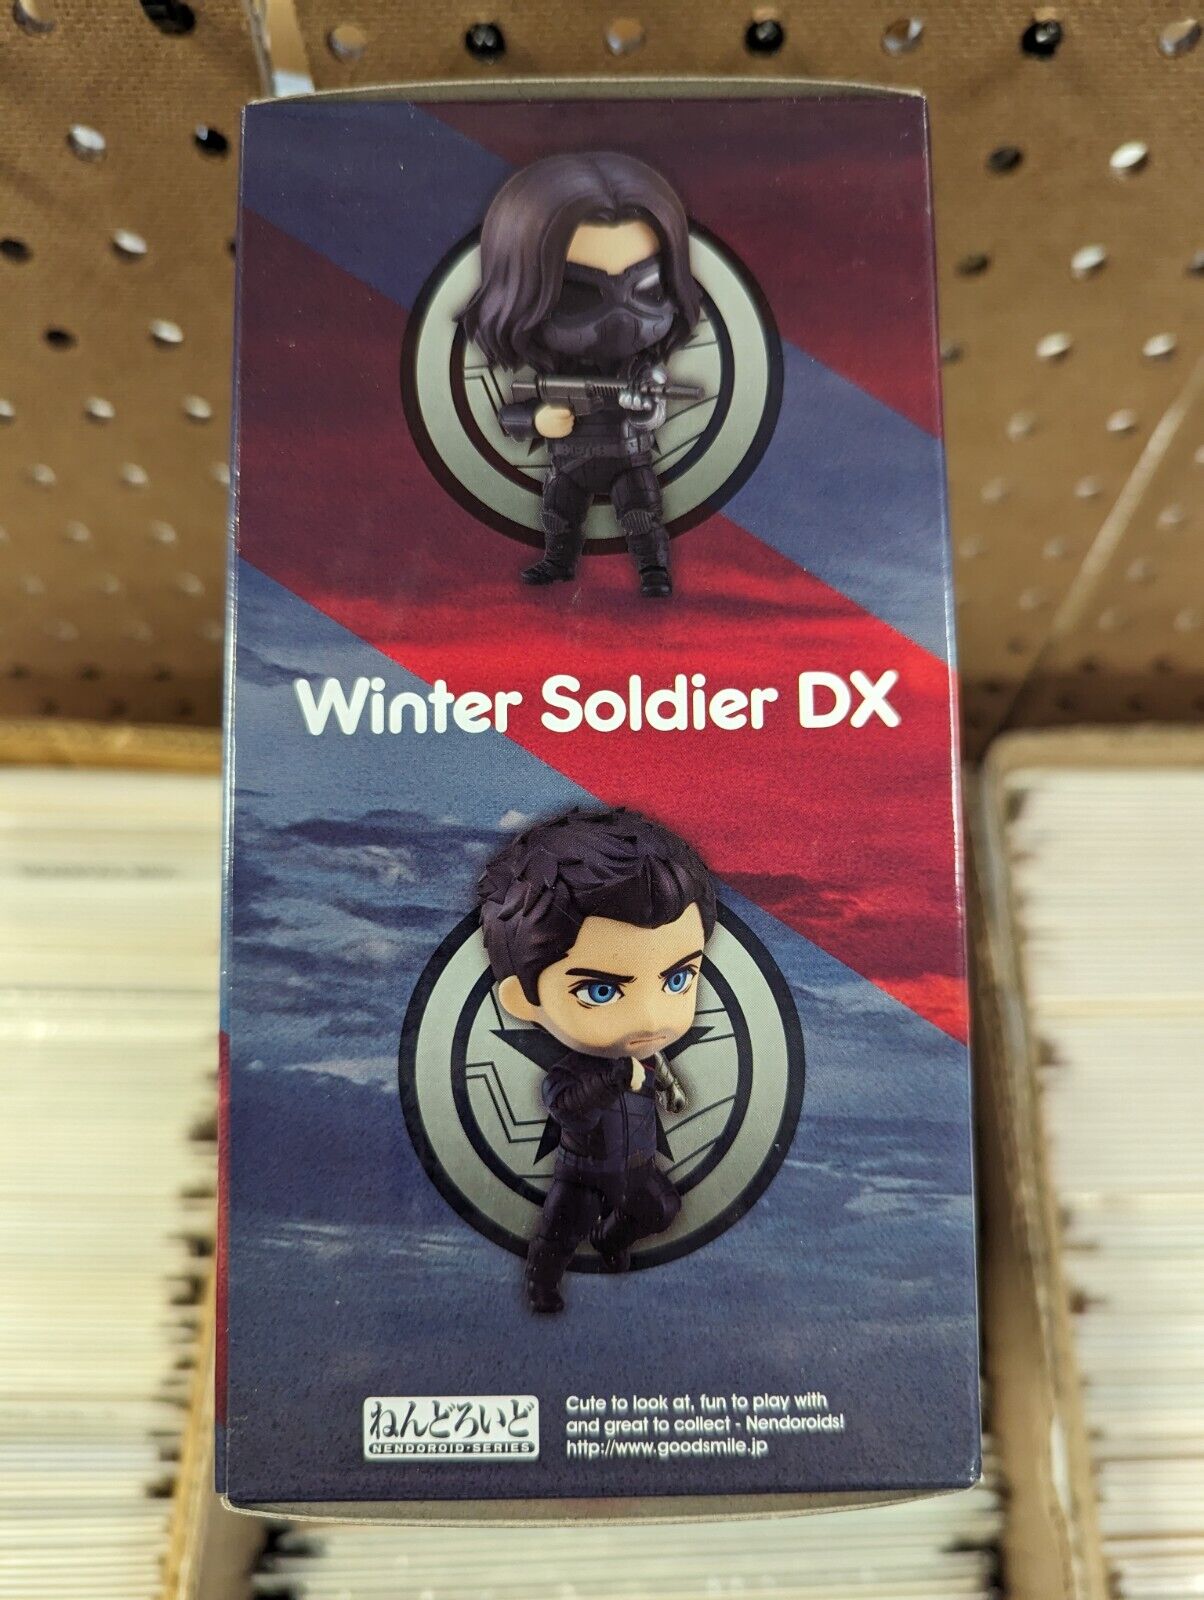 Good Smile Company Winter Soldier Nendoroid 1617-DX Deluxe